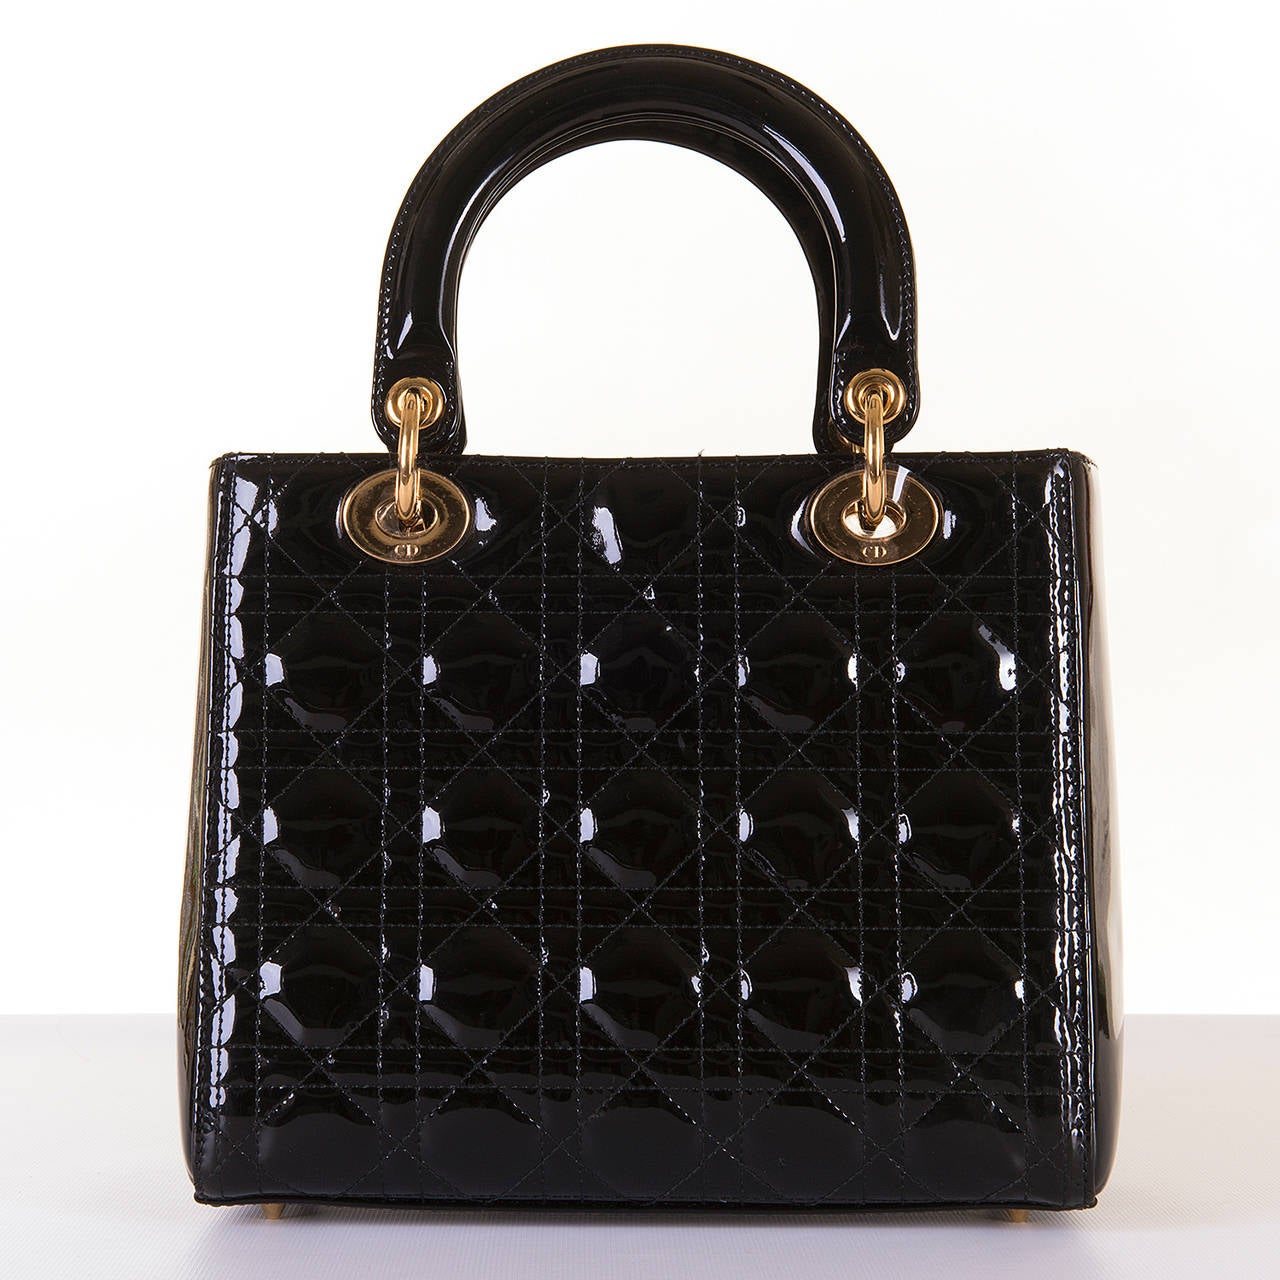 Women's A WOW! 'Lady Dior' Bag, Black Patent Leather & Gold Hardware